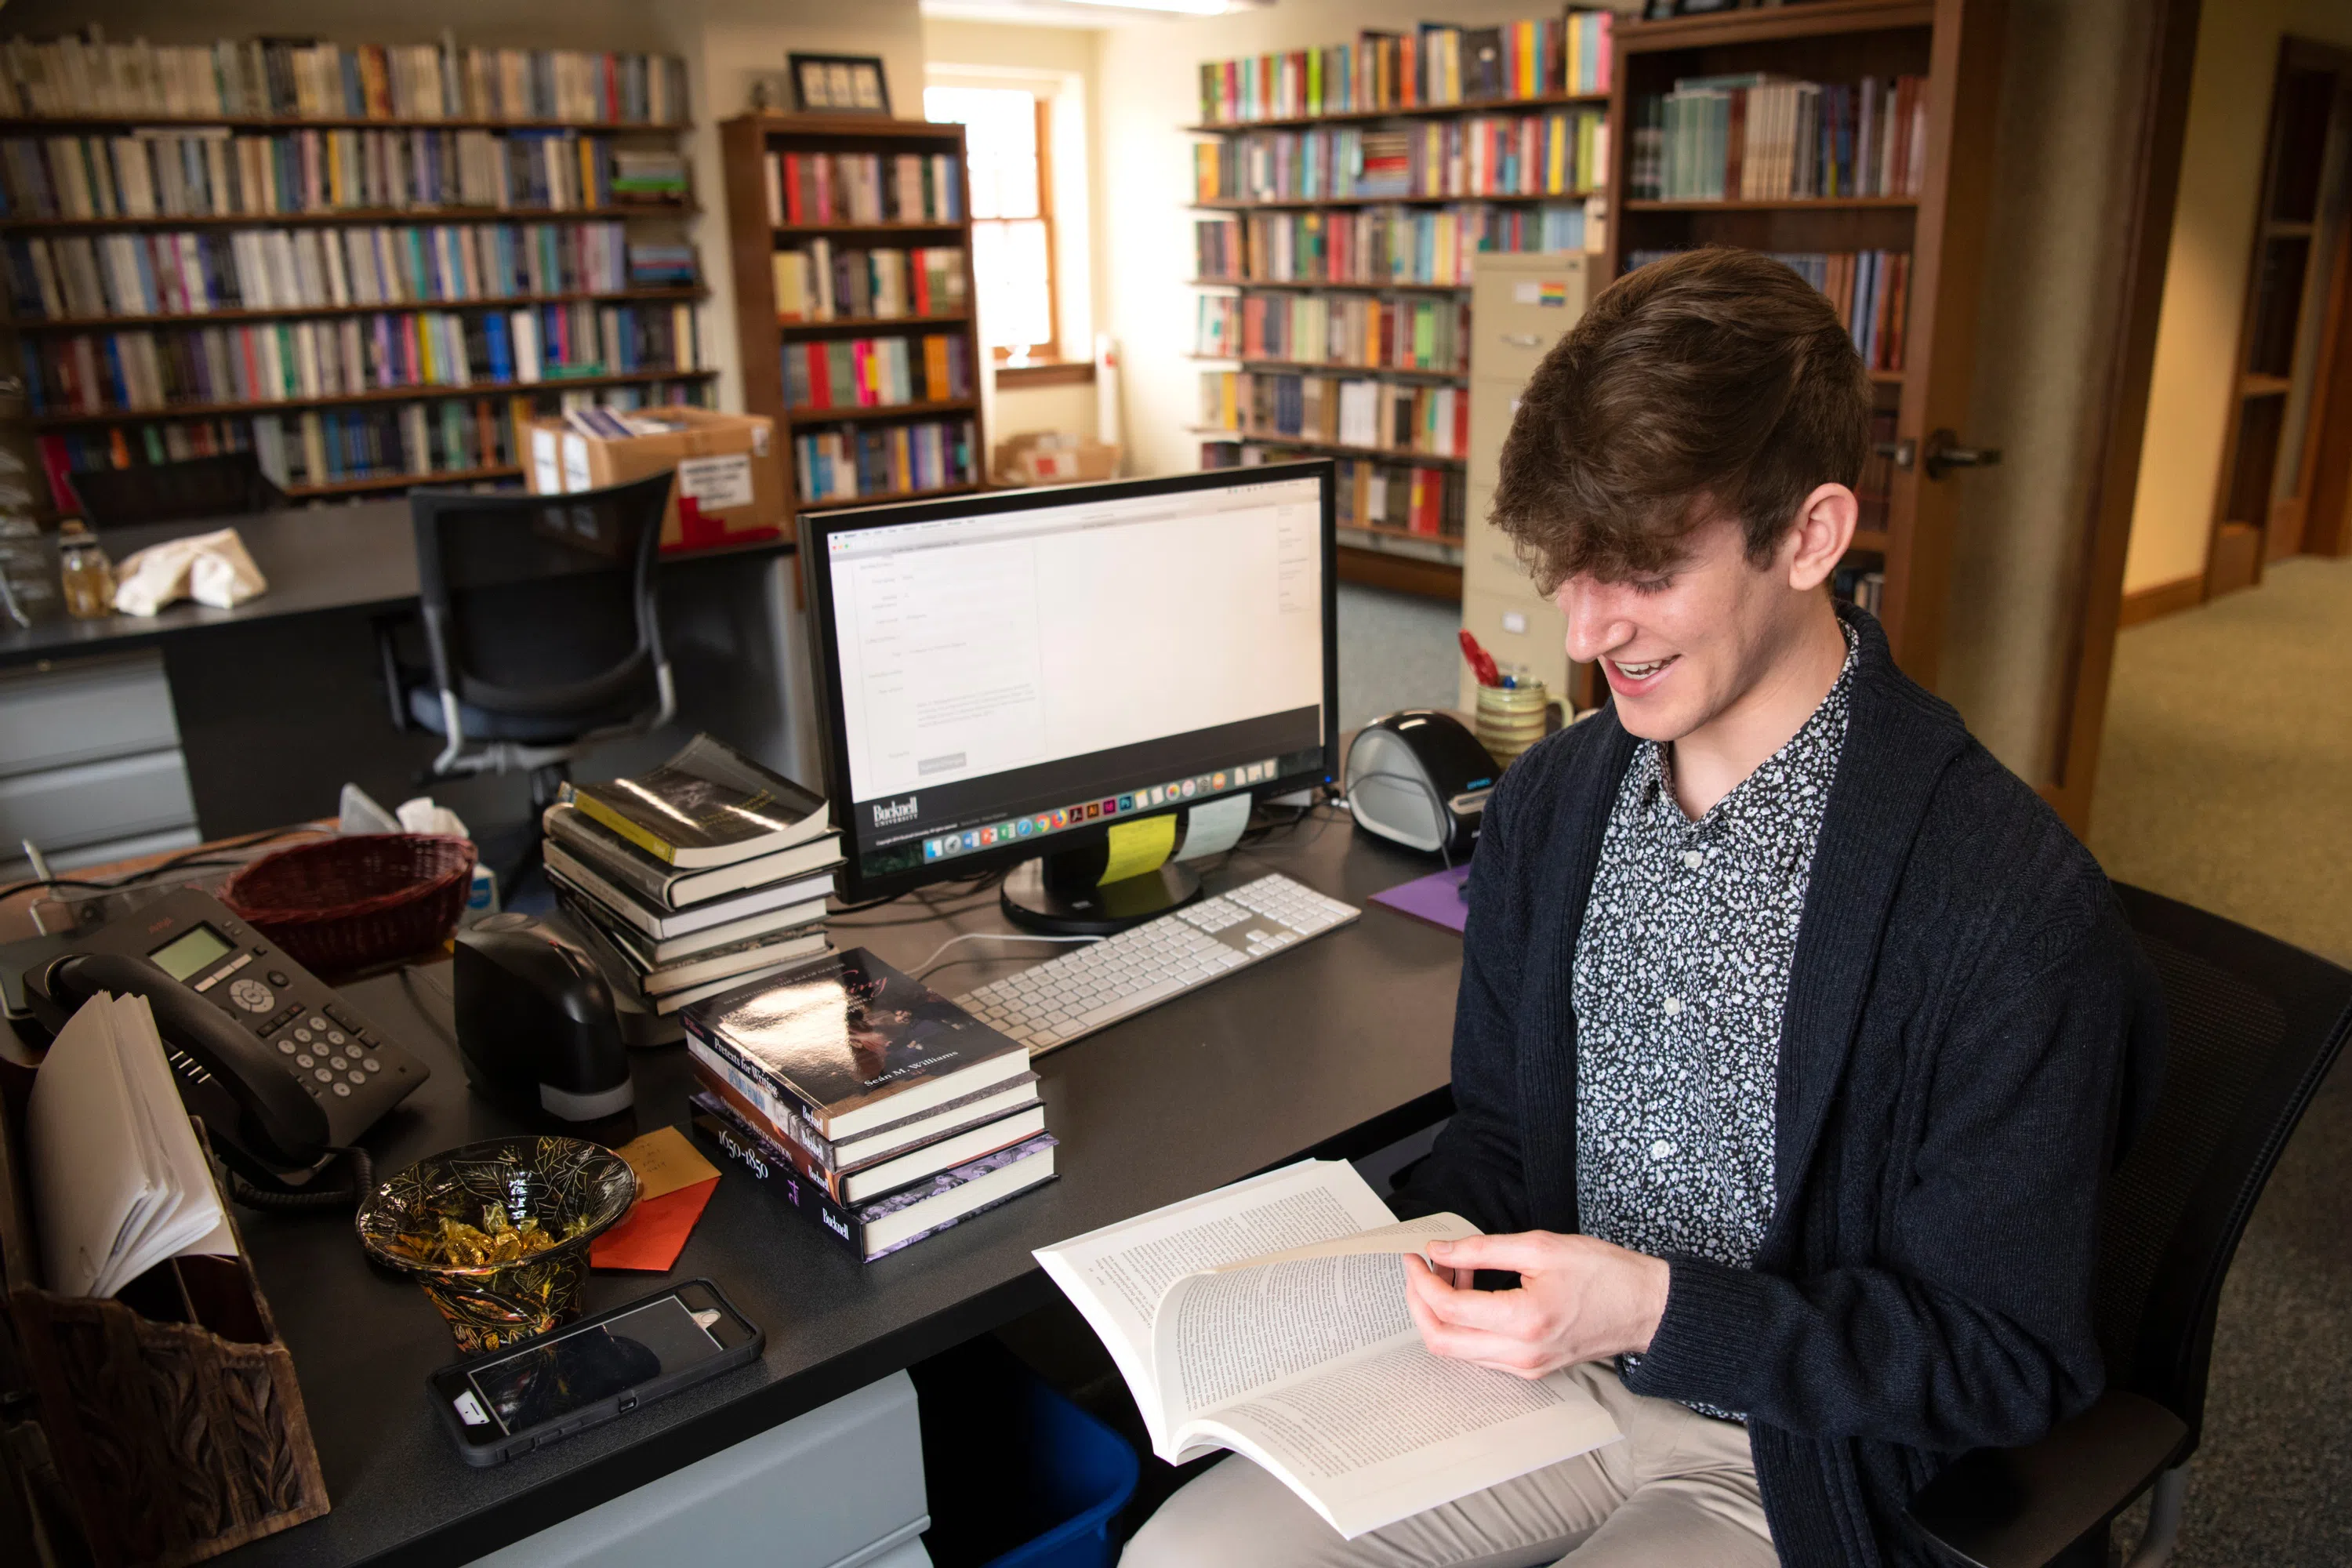 a male student looks through a book with a computer next to him, the room filled with books on bookshelves in the background